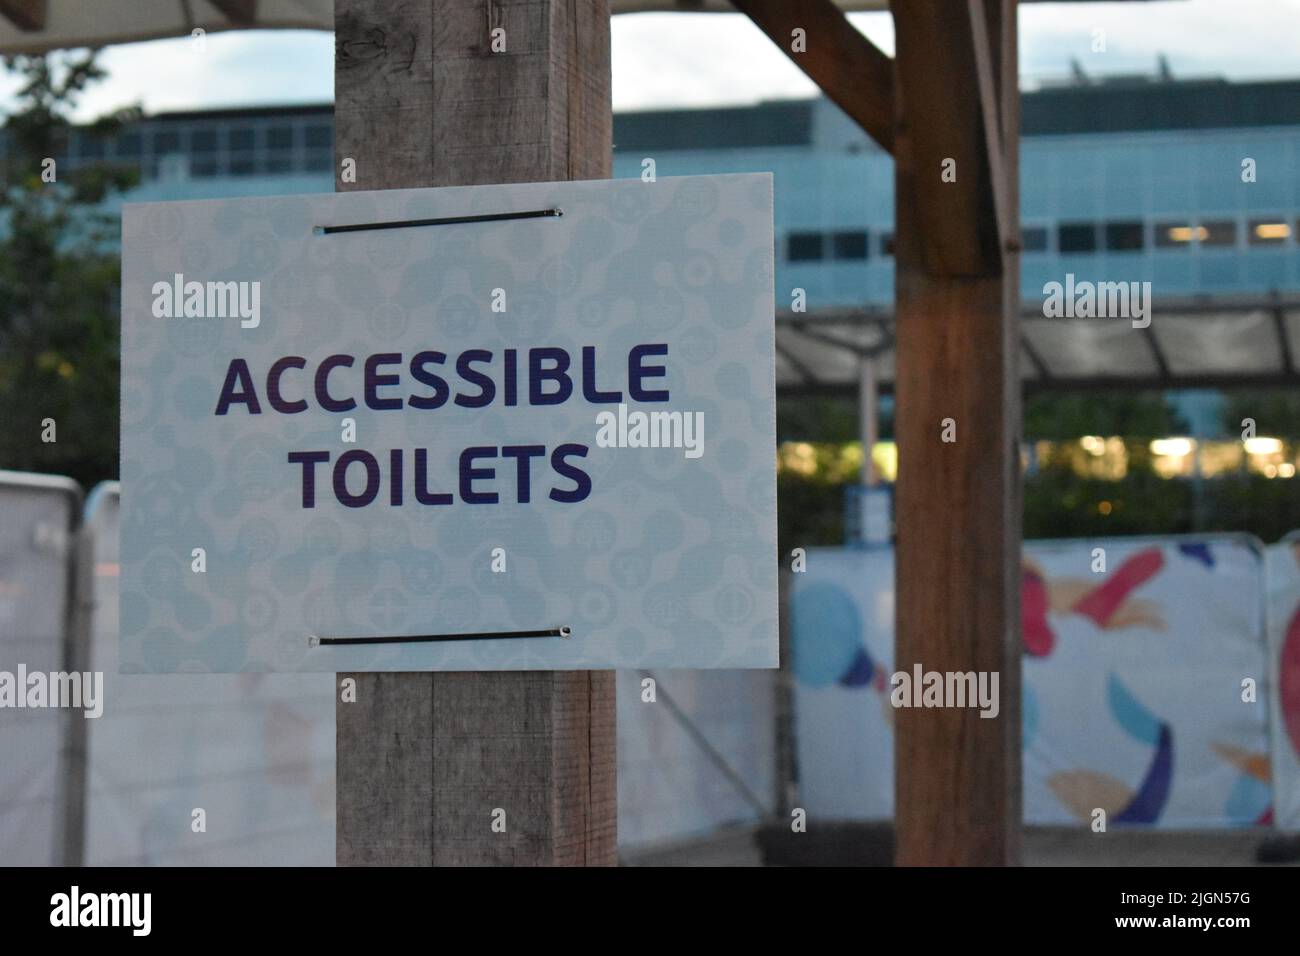 A sign at the Fan Zone in Station Square, Milton Keynes for the UEFA Women's Euro 2022: 'Accessible Toilets'. Stock Photo